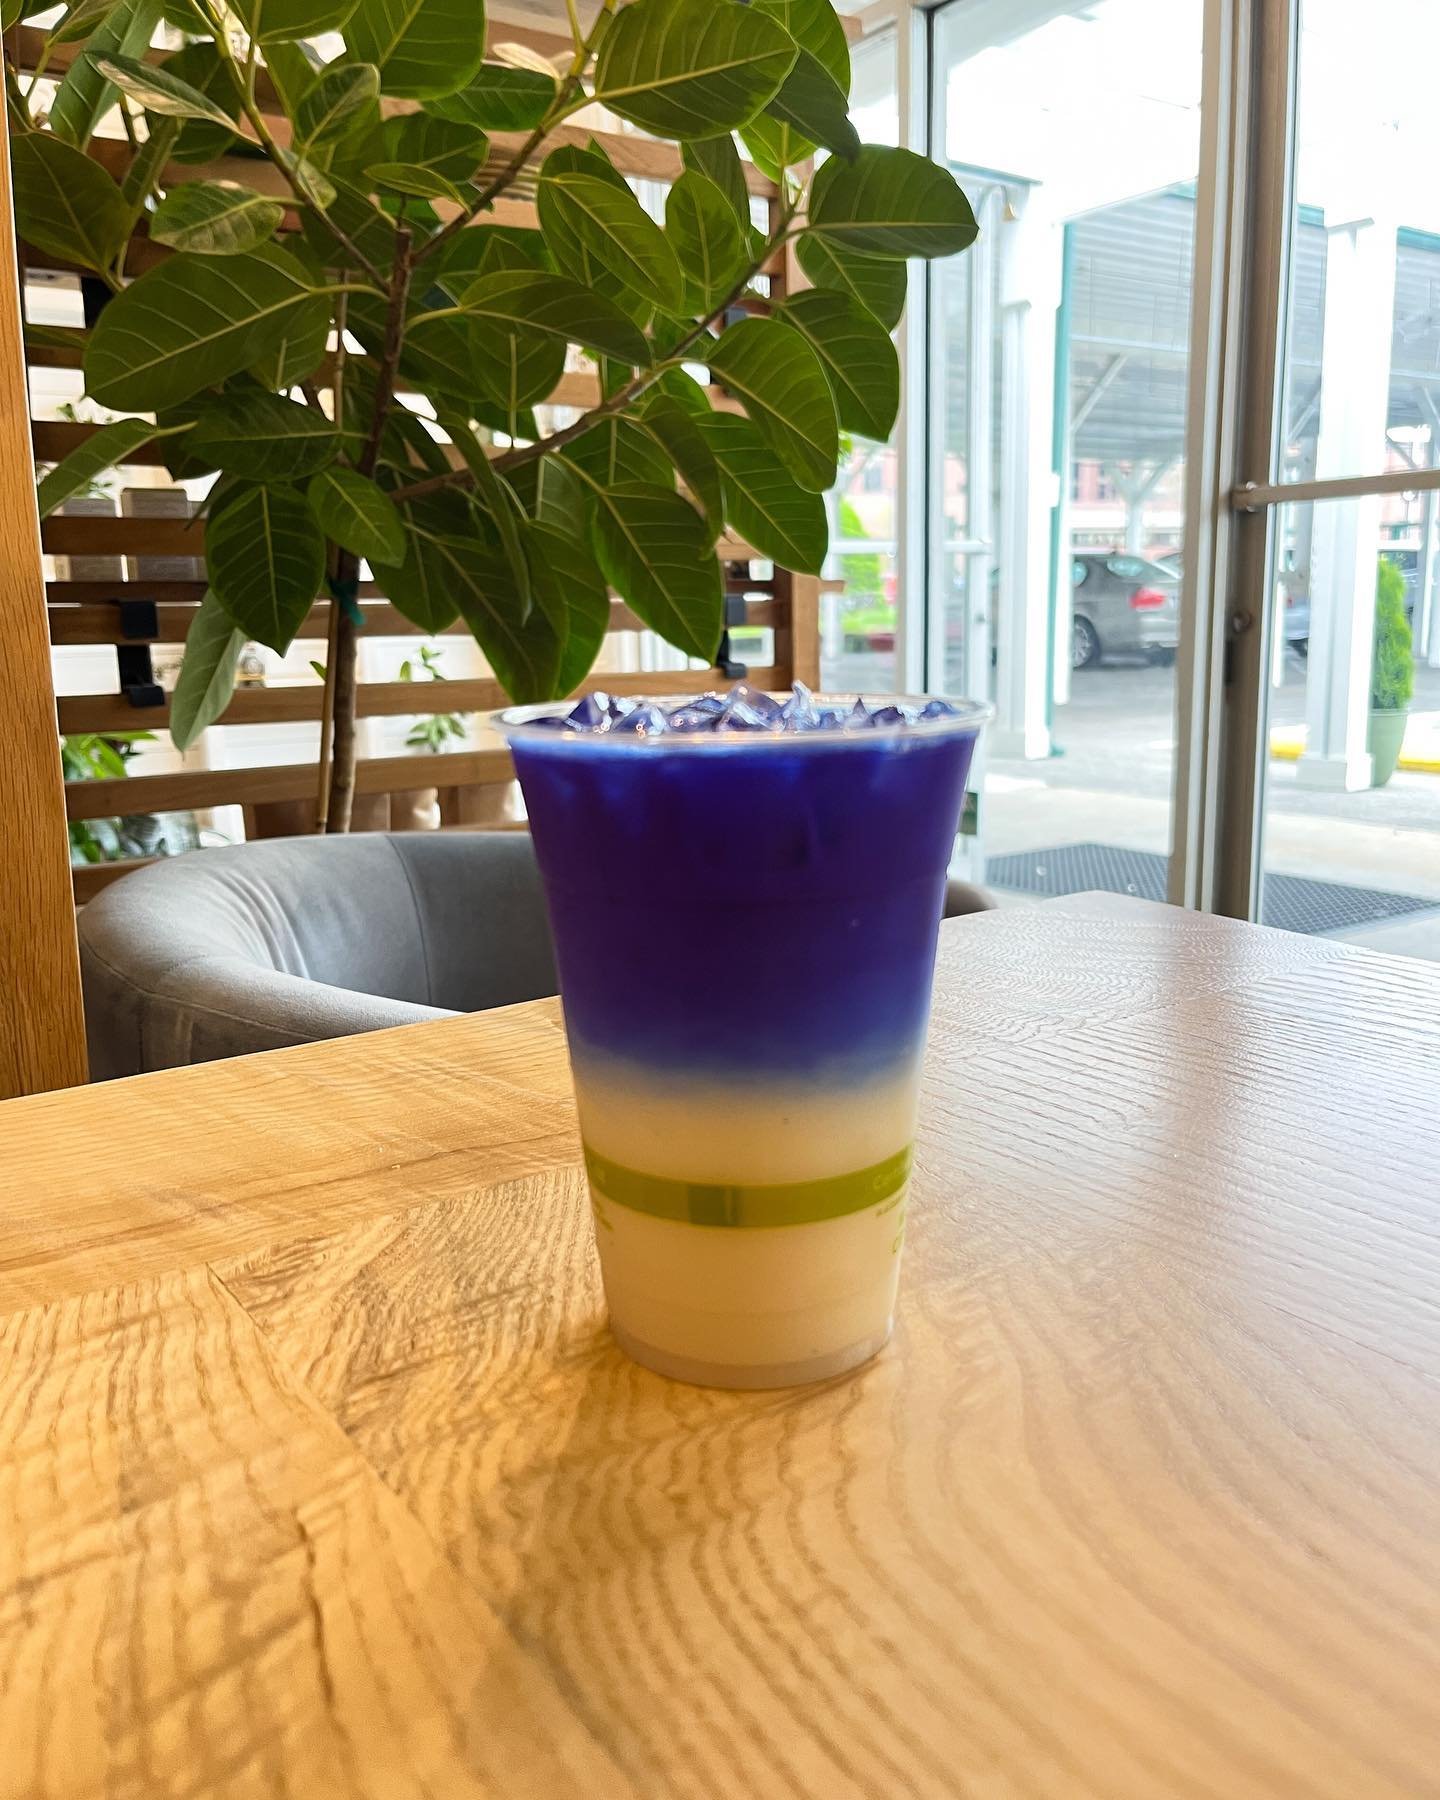 Our specialty Minty Majik comes iced too! The drink gets it&rsquo;s beautiful color from blue spirulina which is rich in antioxidants. 💙

#spirulina #bluemajik #e3live #cafe #juicery #coldpressed #vibrantsunshine #vegan #pittsburgheats #plantbased